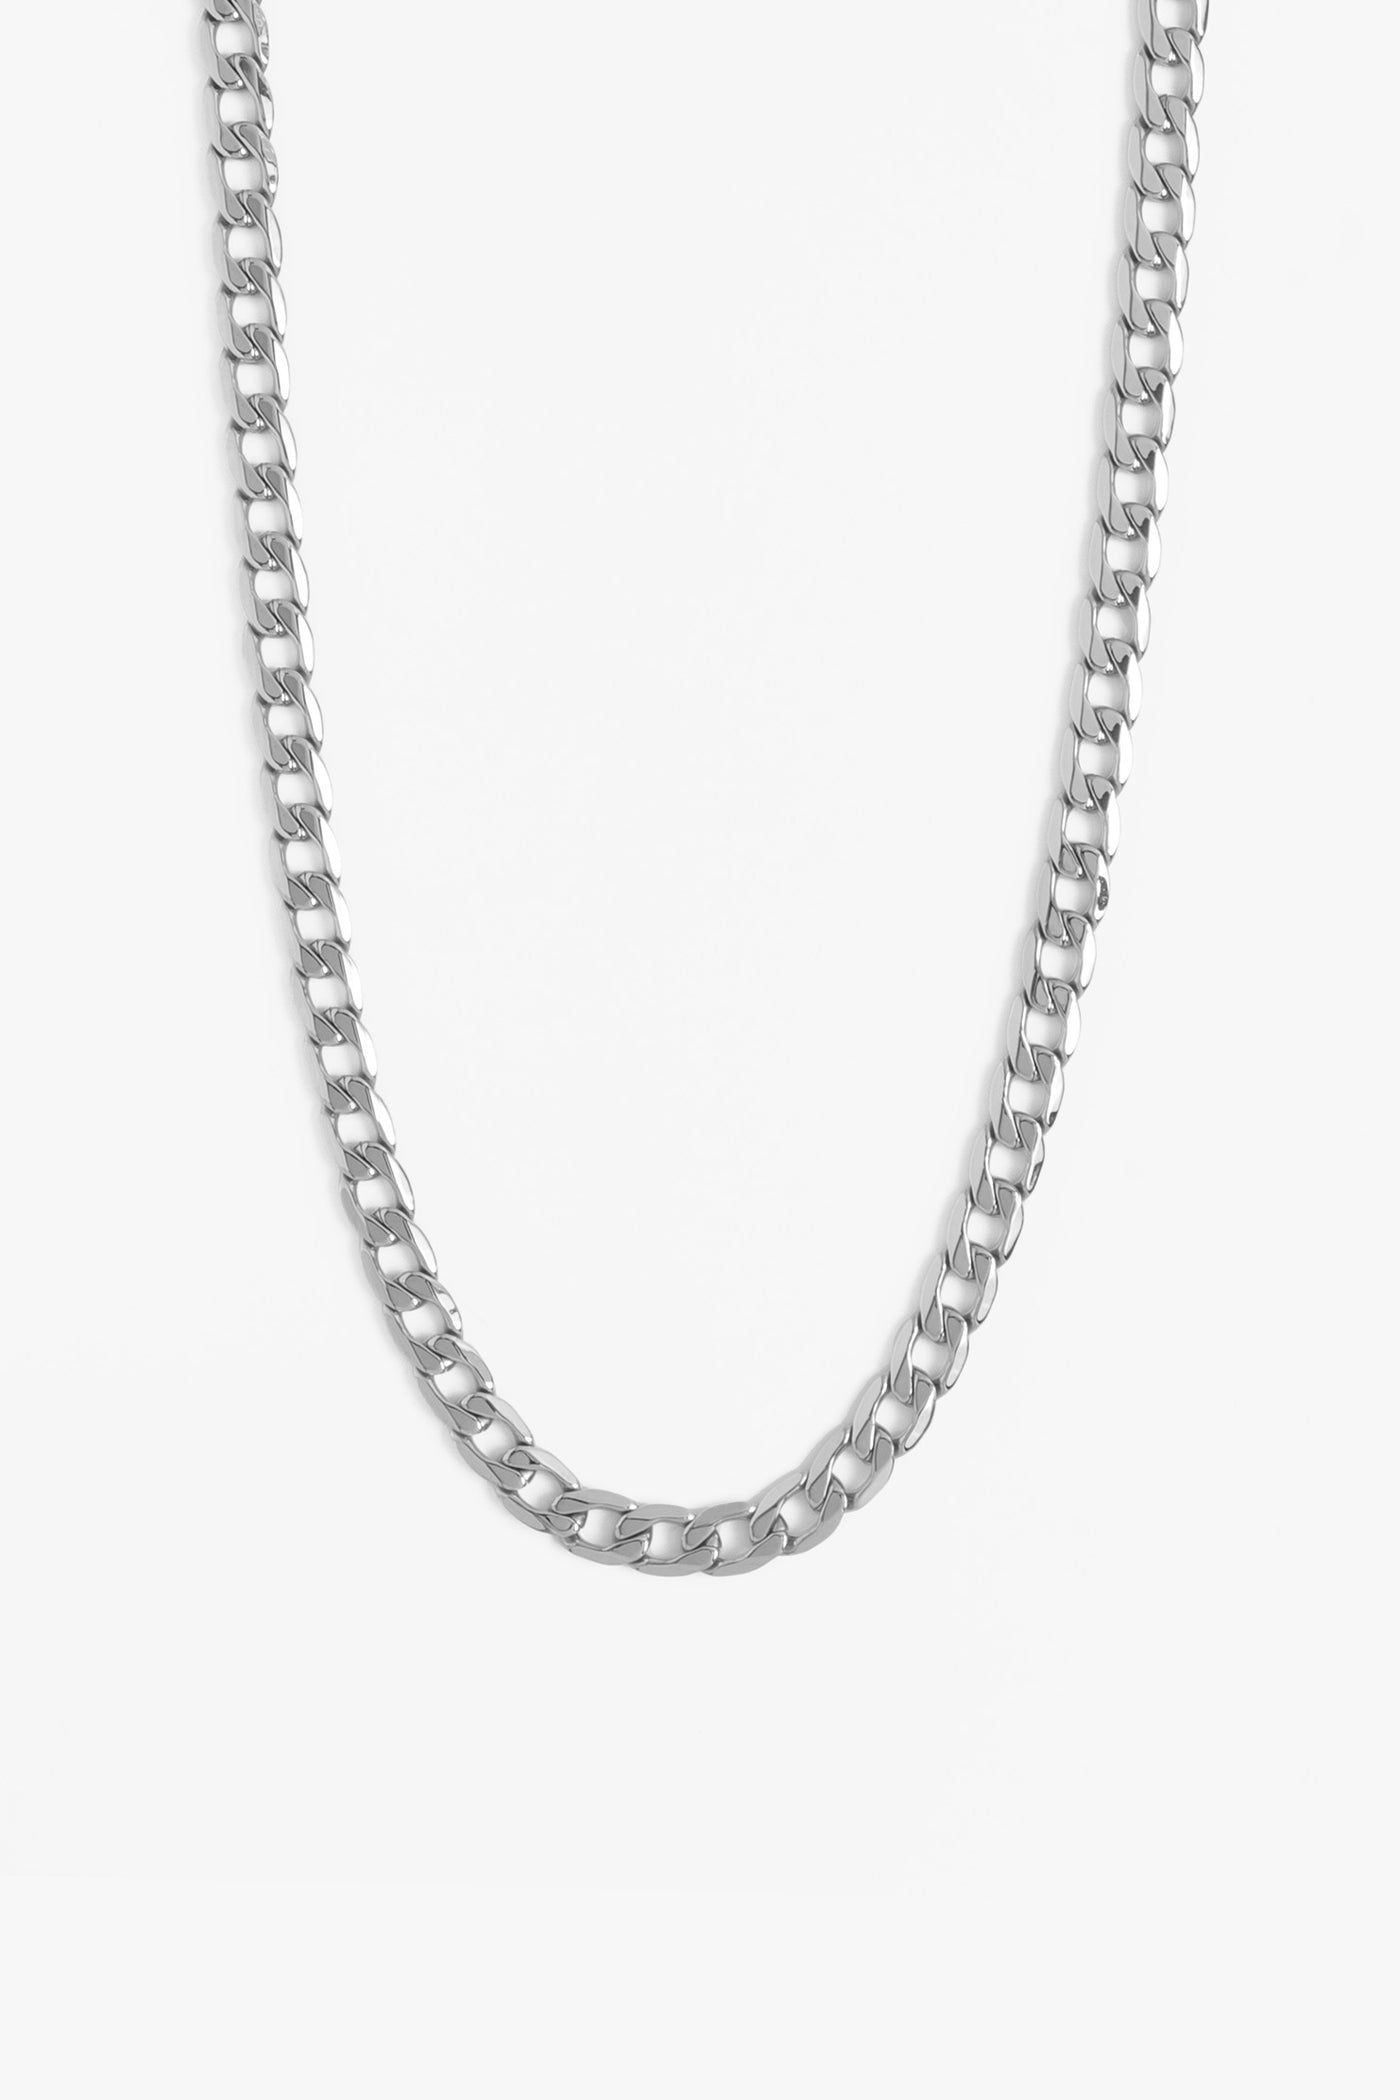 Marrin Costello Jewelry Kings Chain 18 inch flat cuban link chain. Waterproof, sustainable, hypoallergenic. Polished stainless steel.